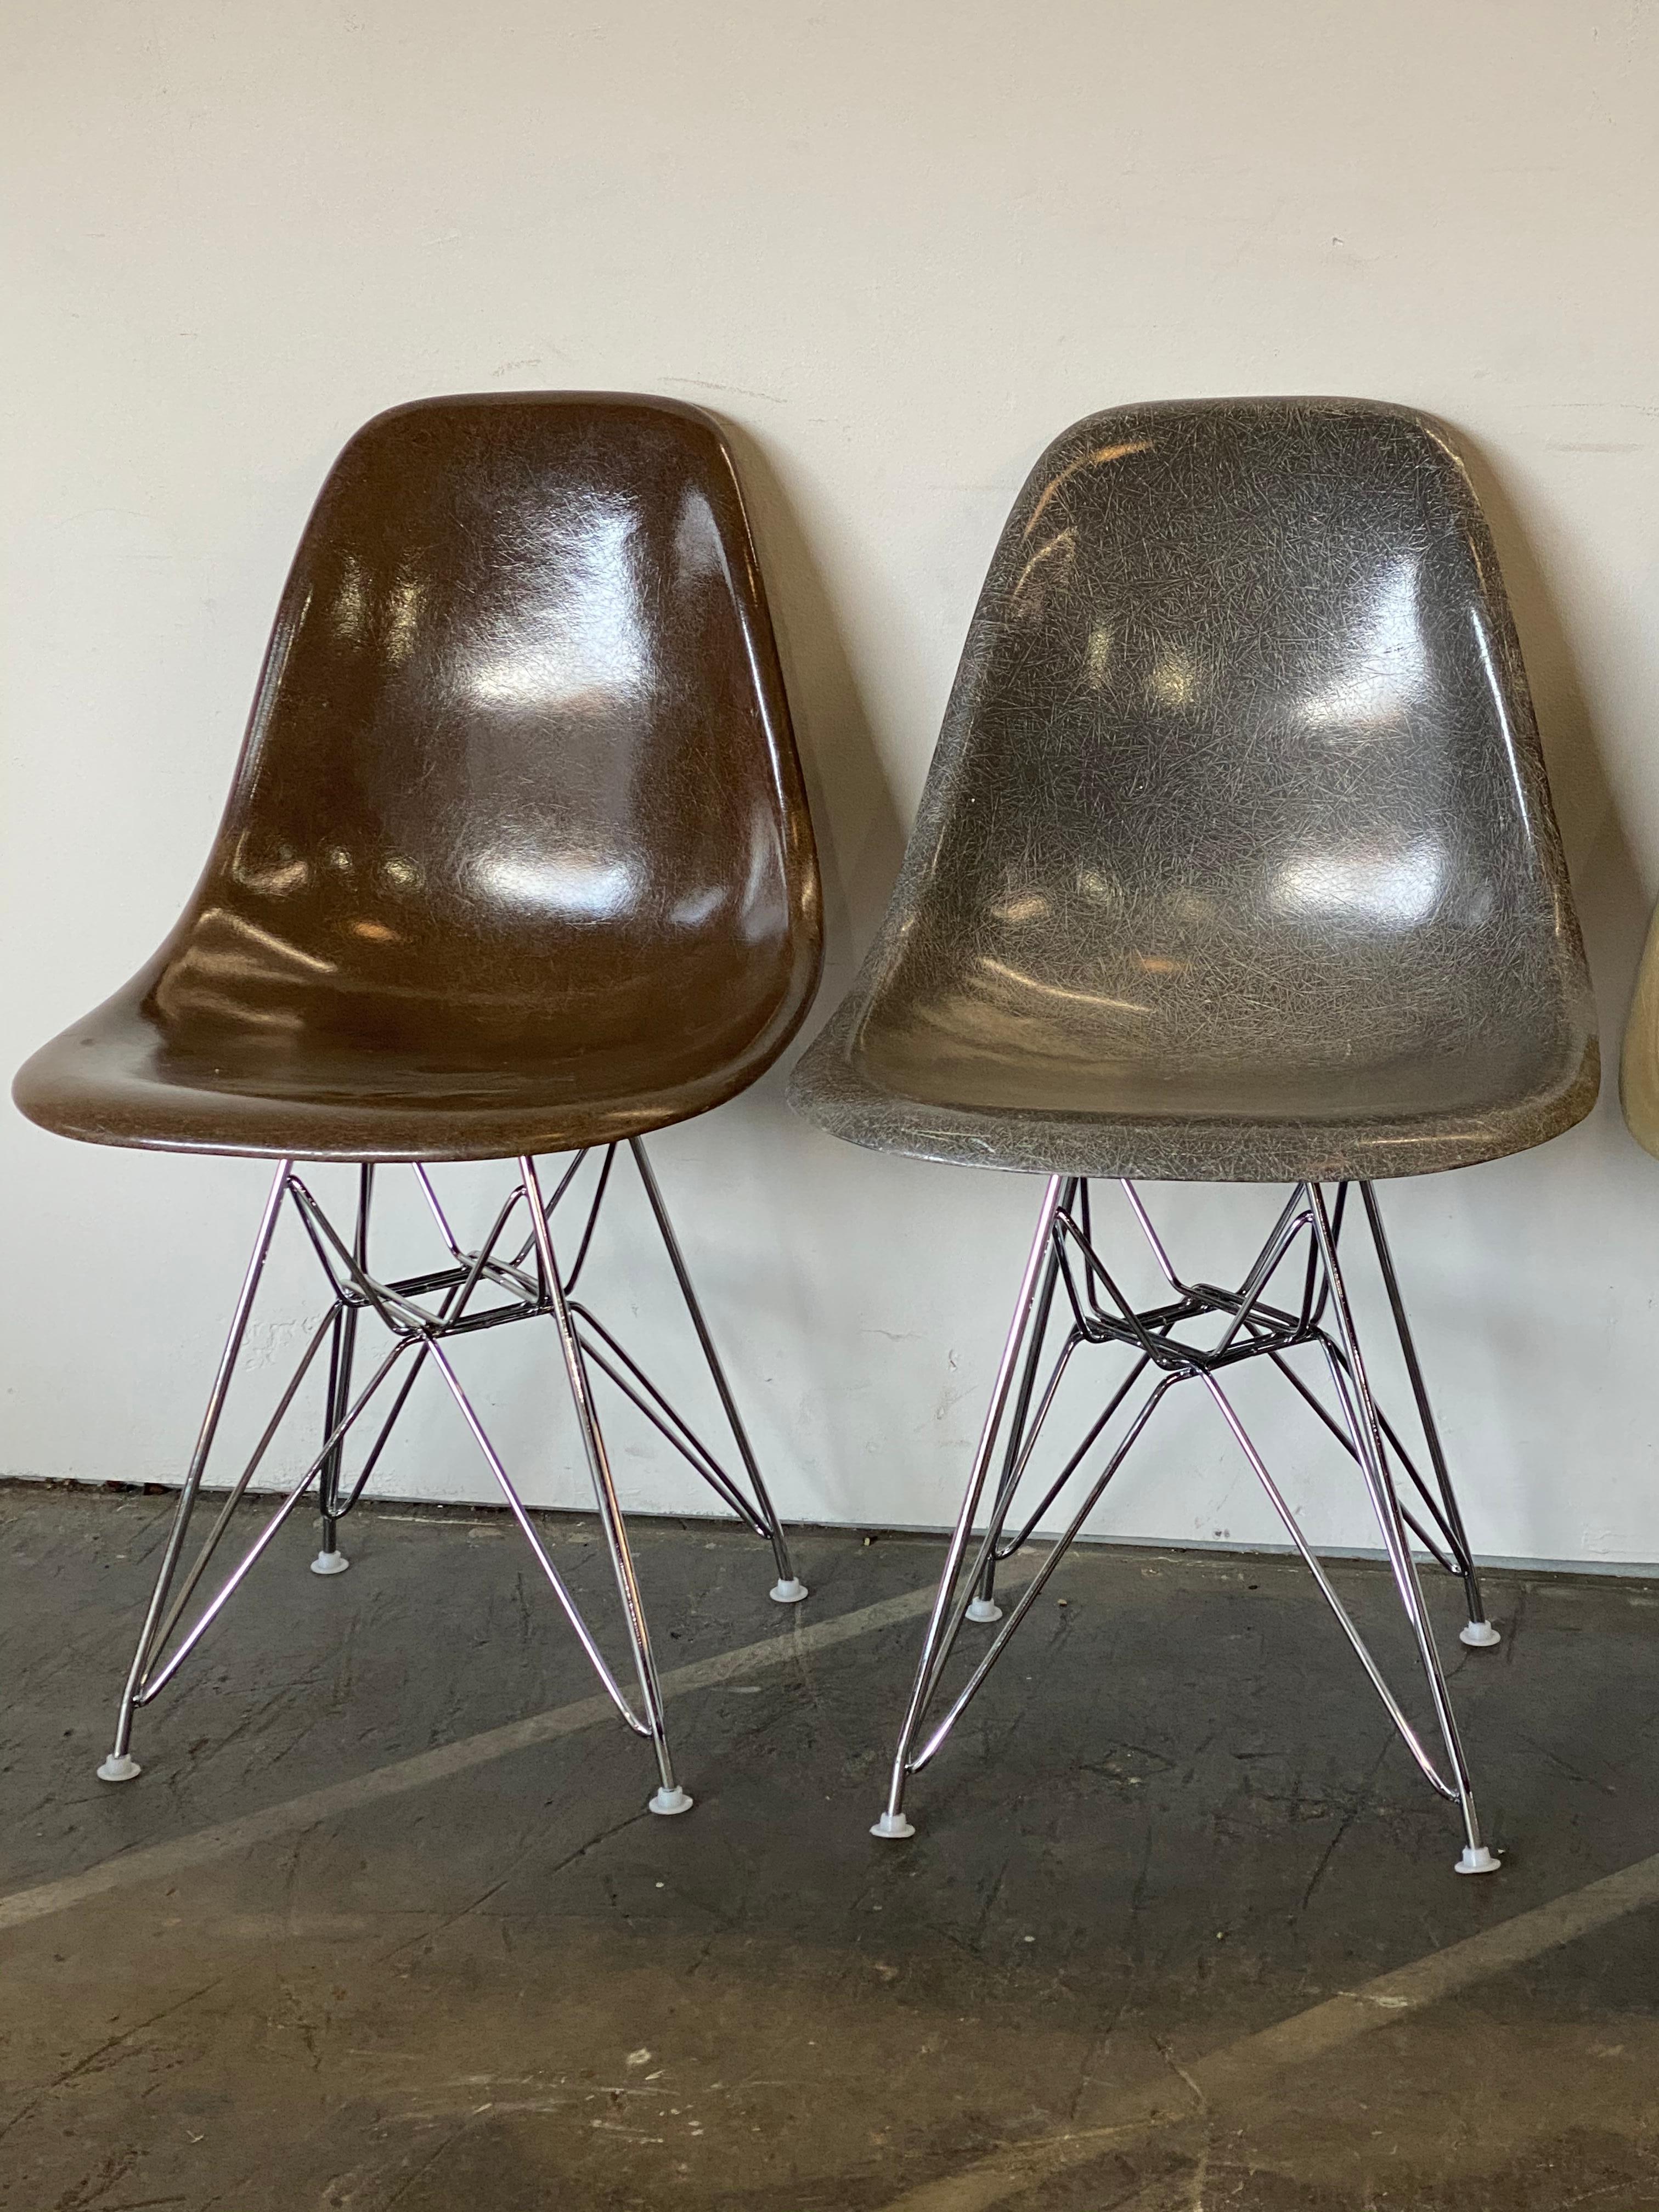 Fiberglass Herman Miller Eames DSR Dining Chairs in Earth Tones